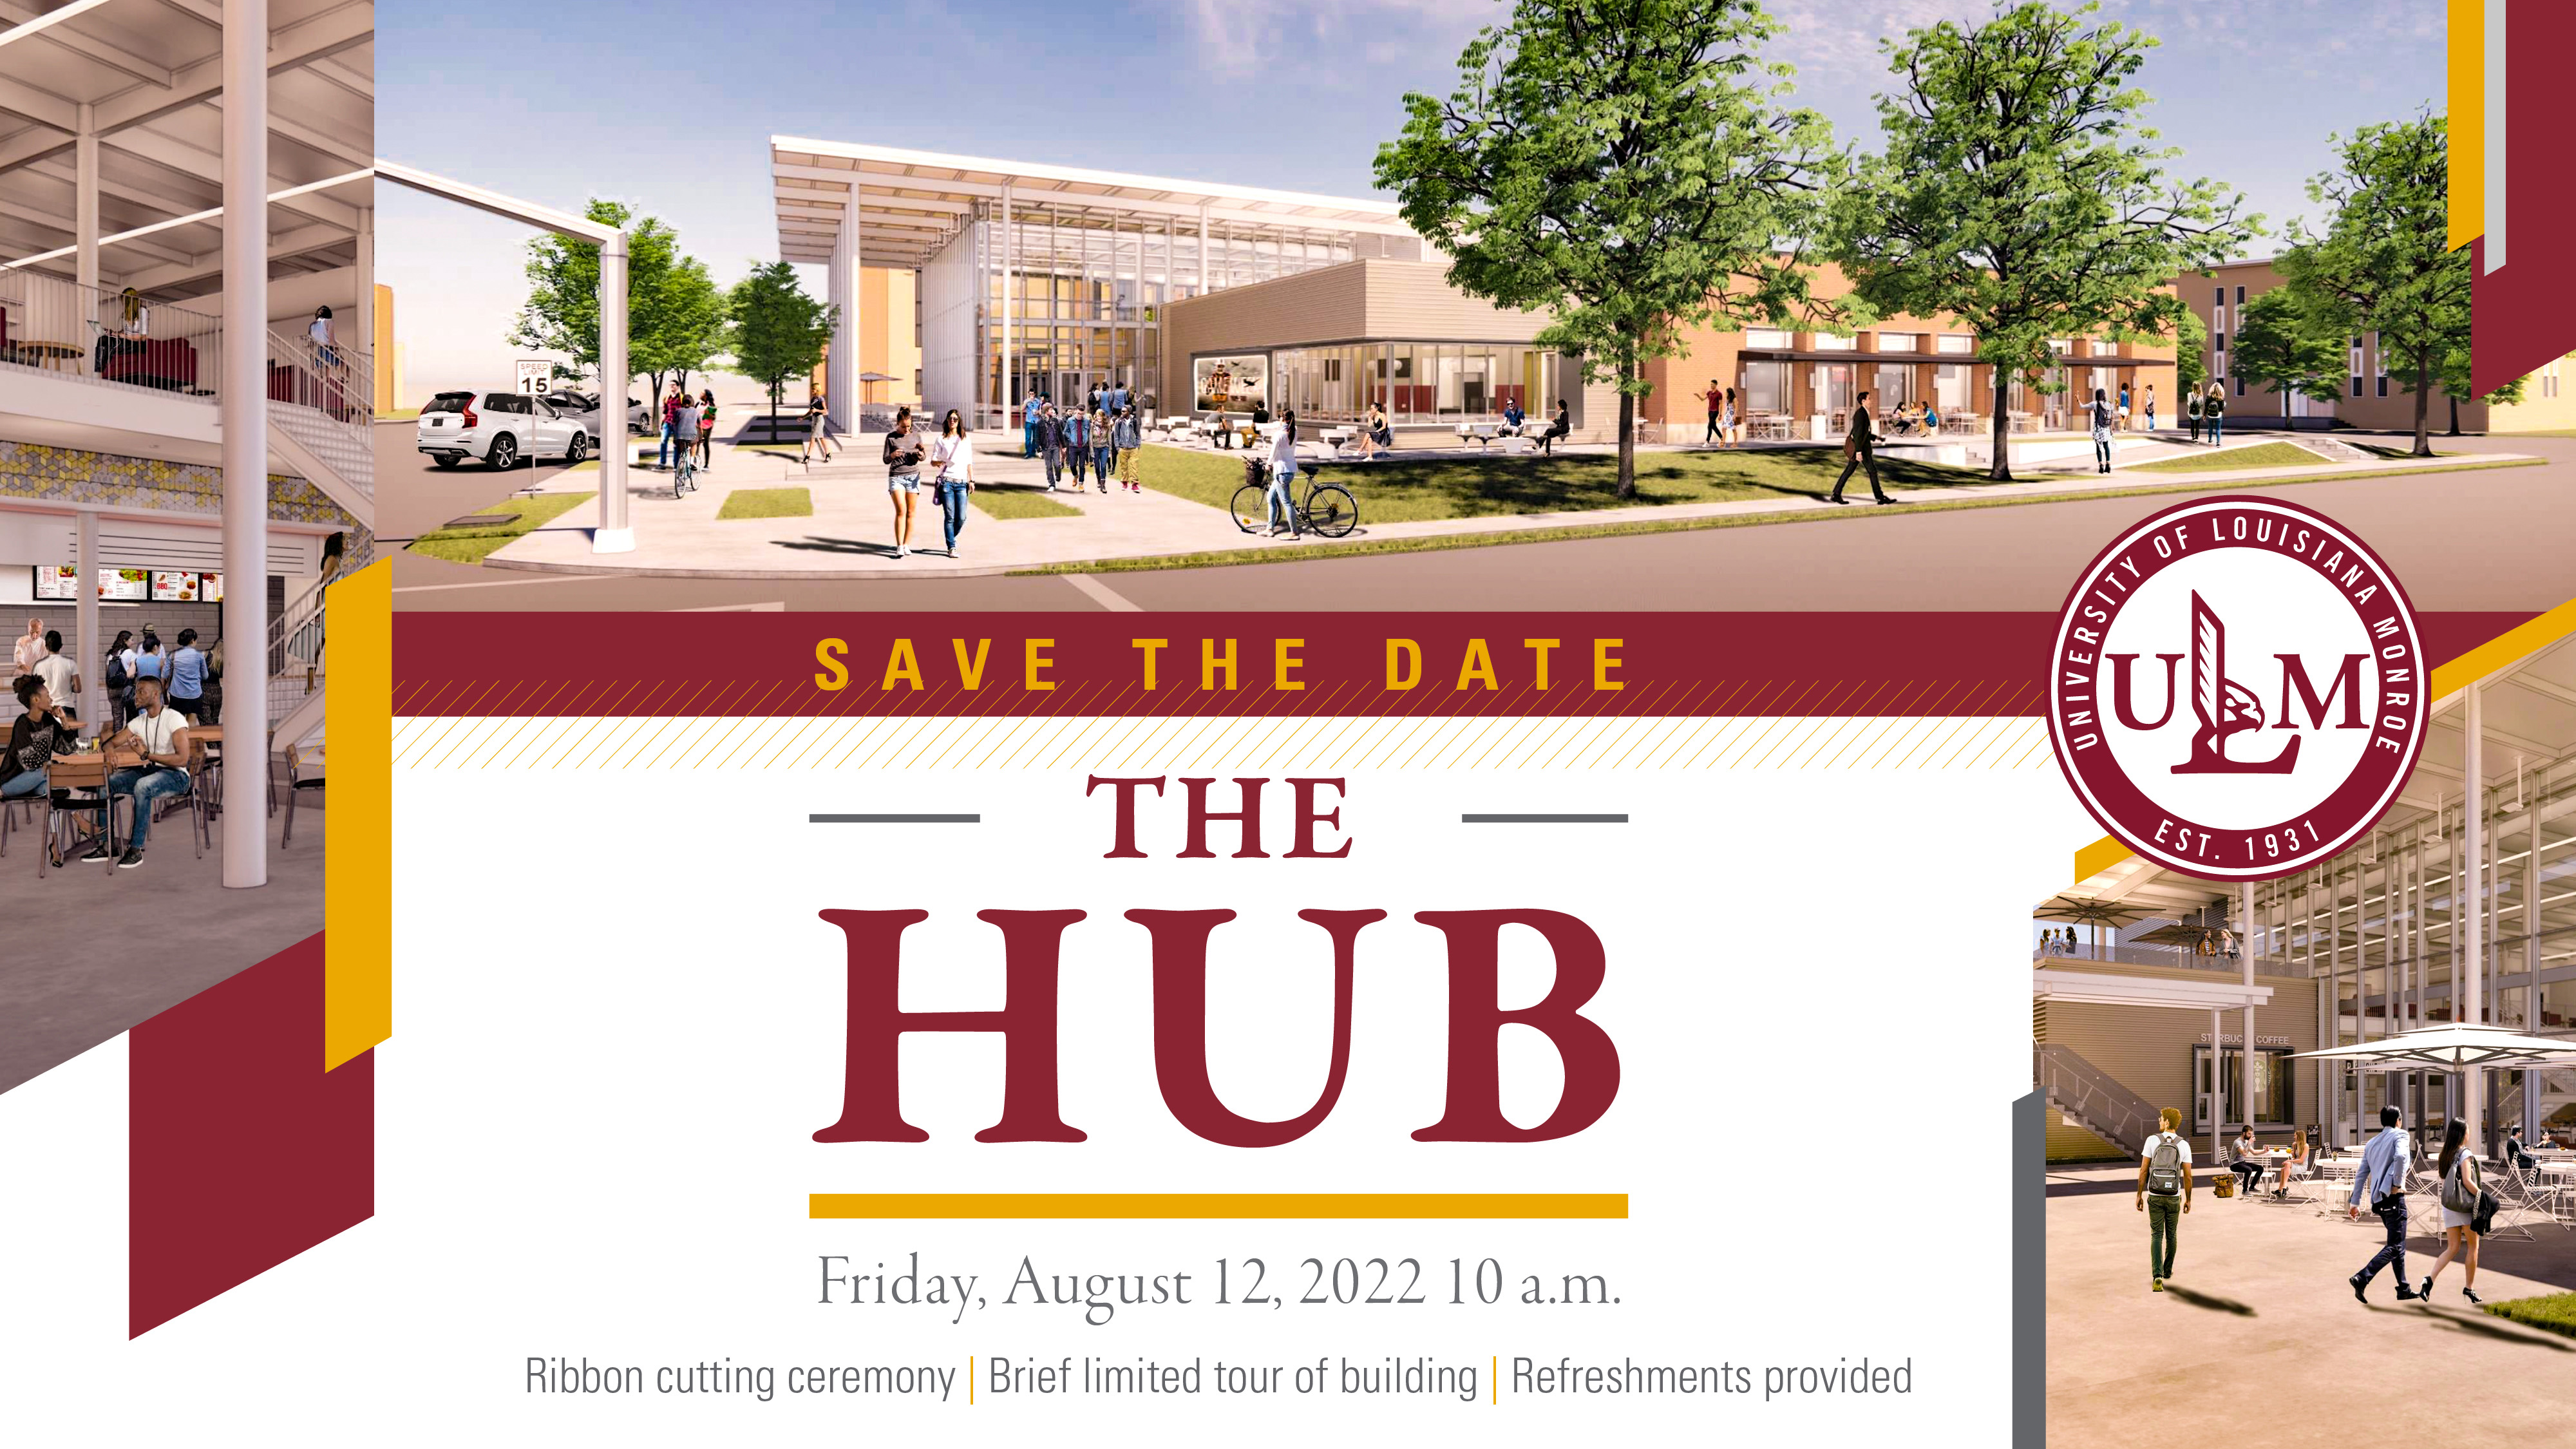 Renderings of The Hub surrounded by text that reads, "Save the Date The Hub Friday, August 12, 2022 10 a.m. Ribbon cutting ceremony | Brief limited tour of the building | Refreshments provided"